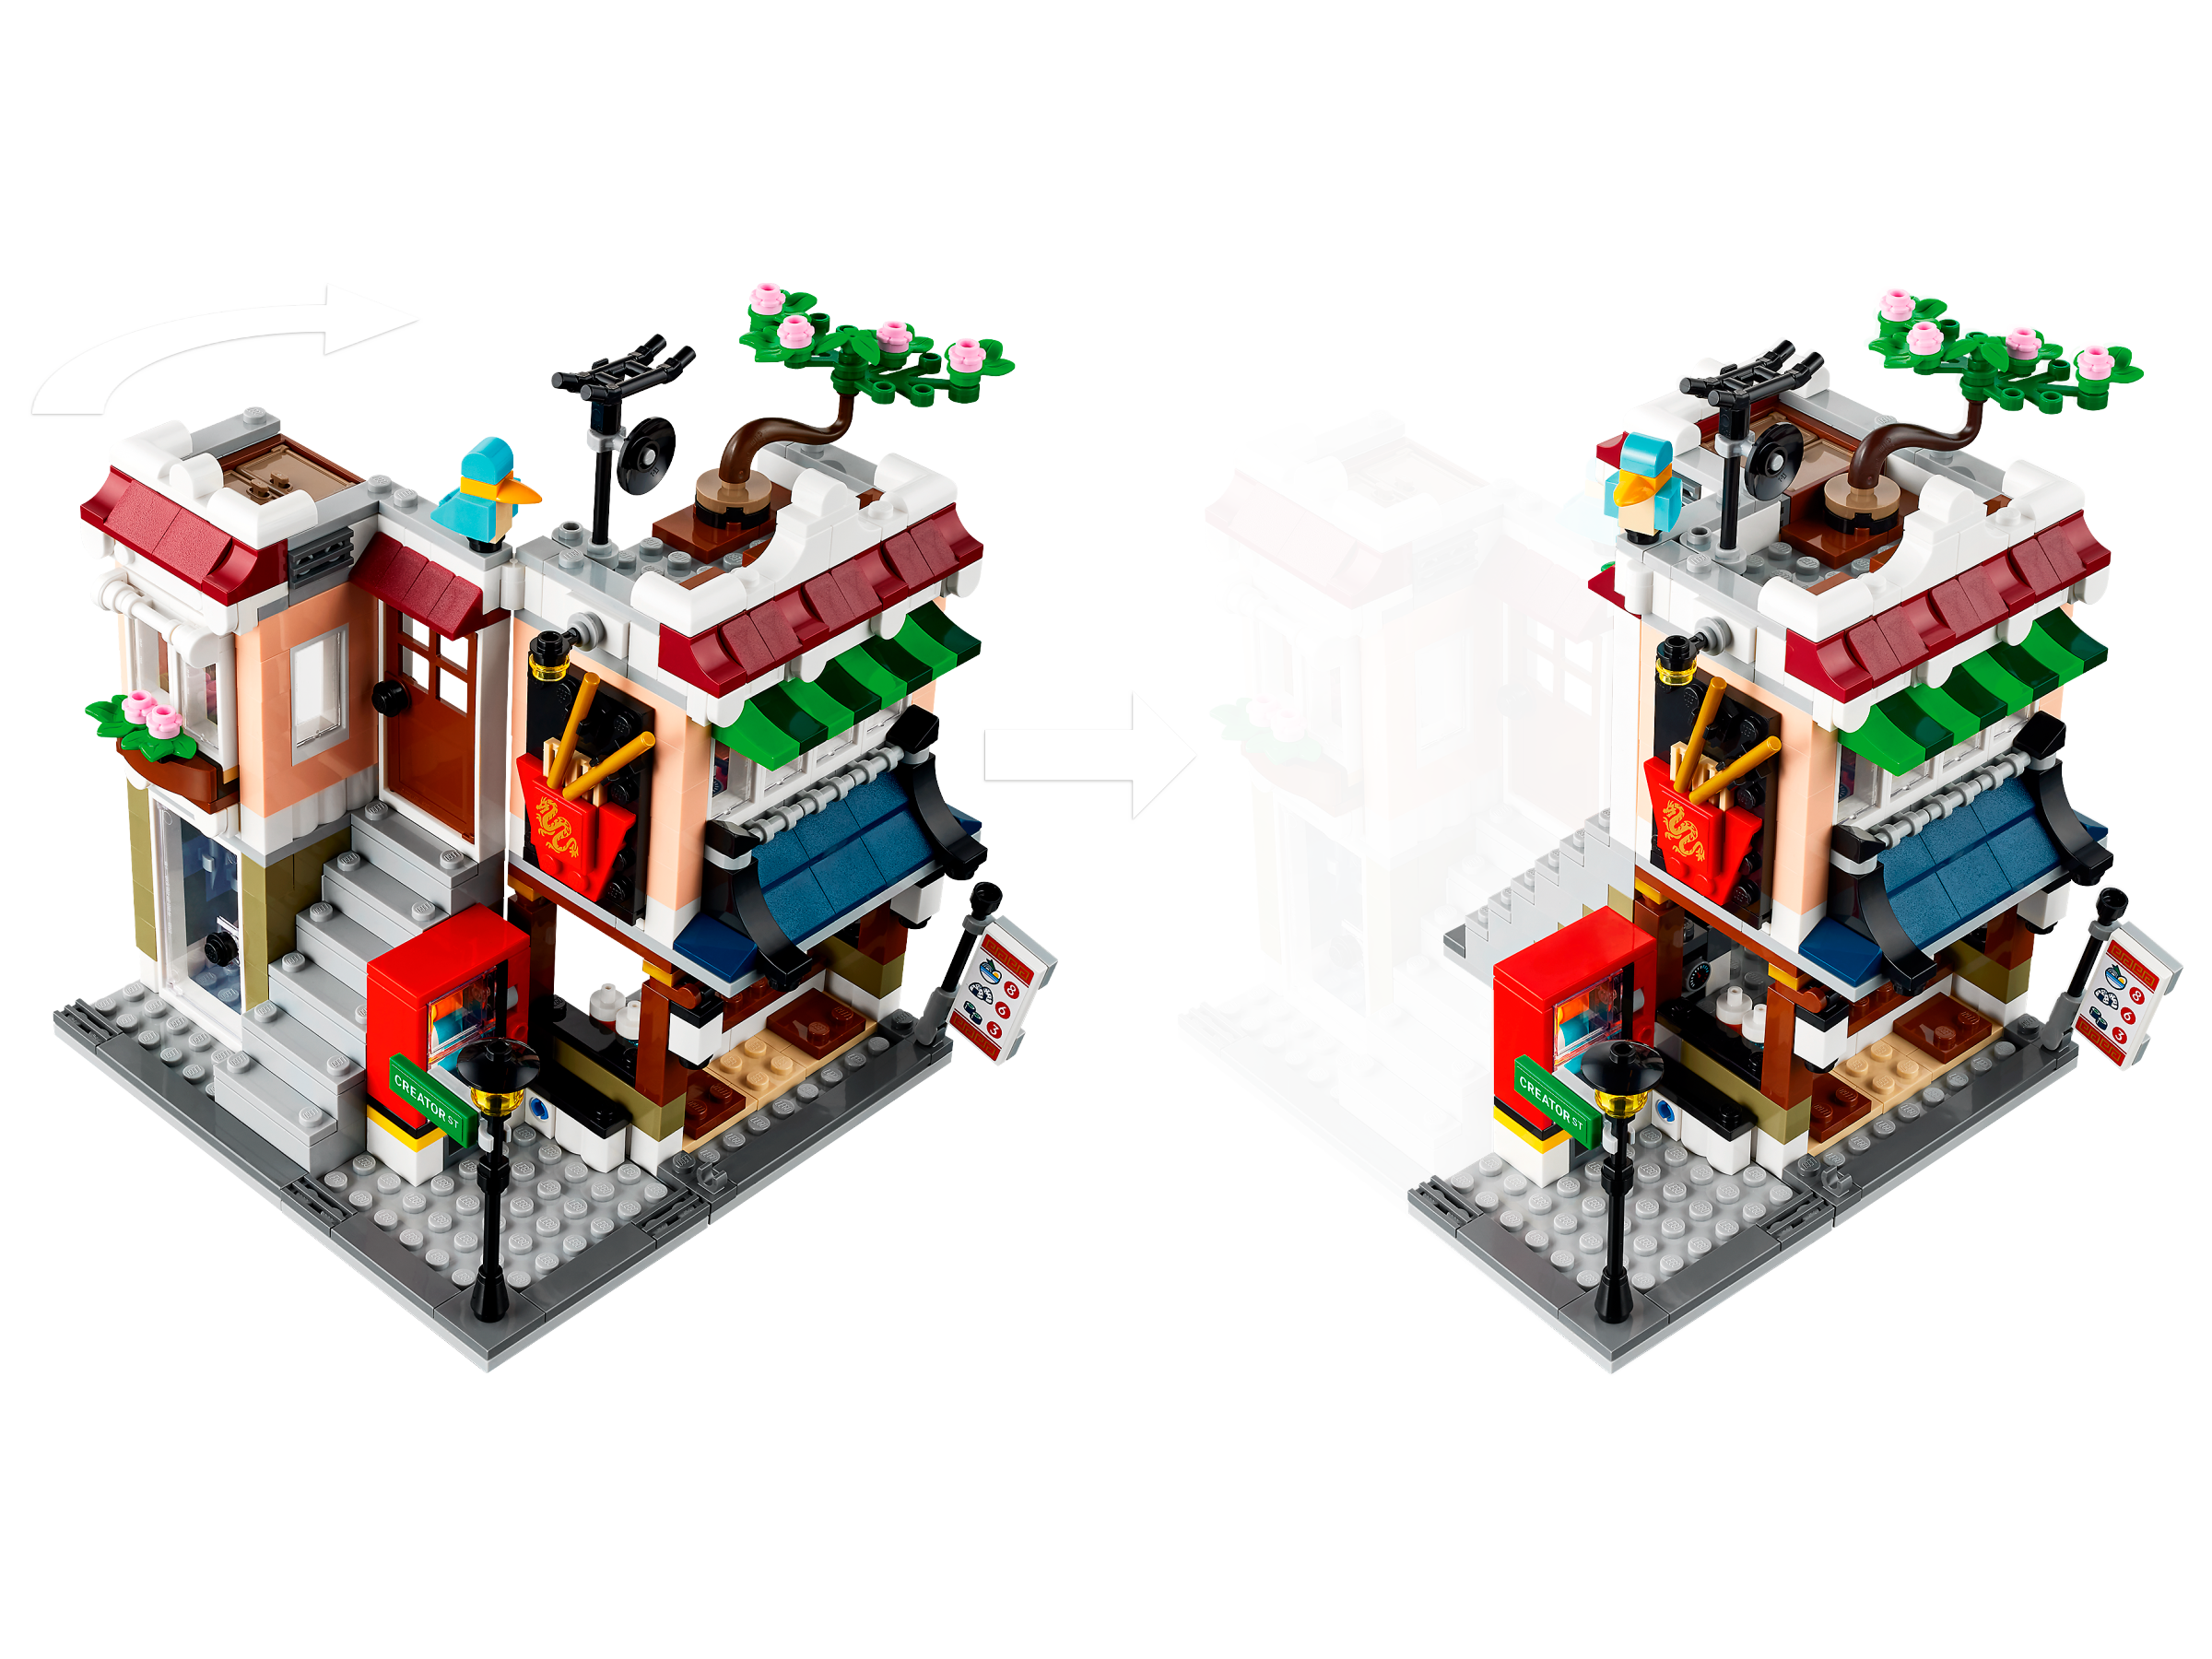 Downtown Noodle Shop | Creator 3-in-1 | Buy online at the Official LEGO® Shop US